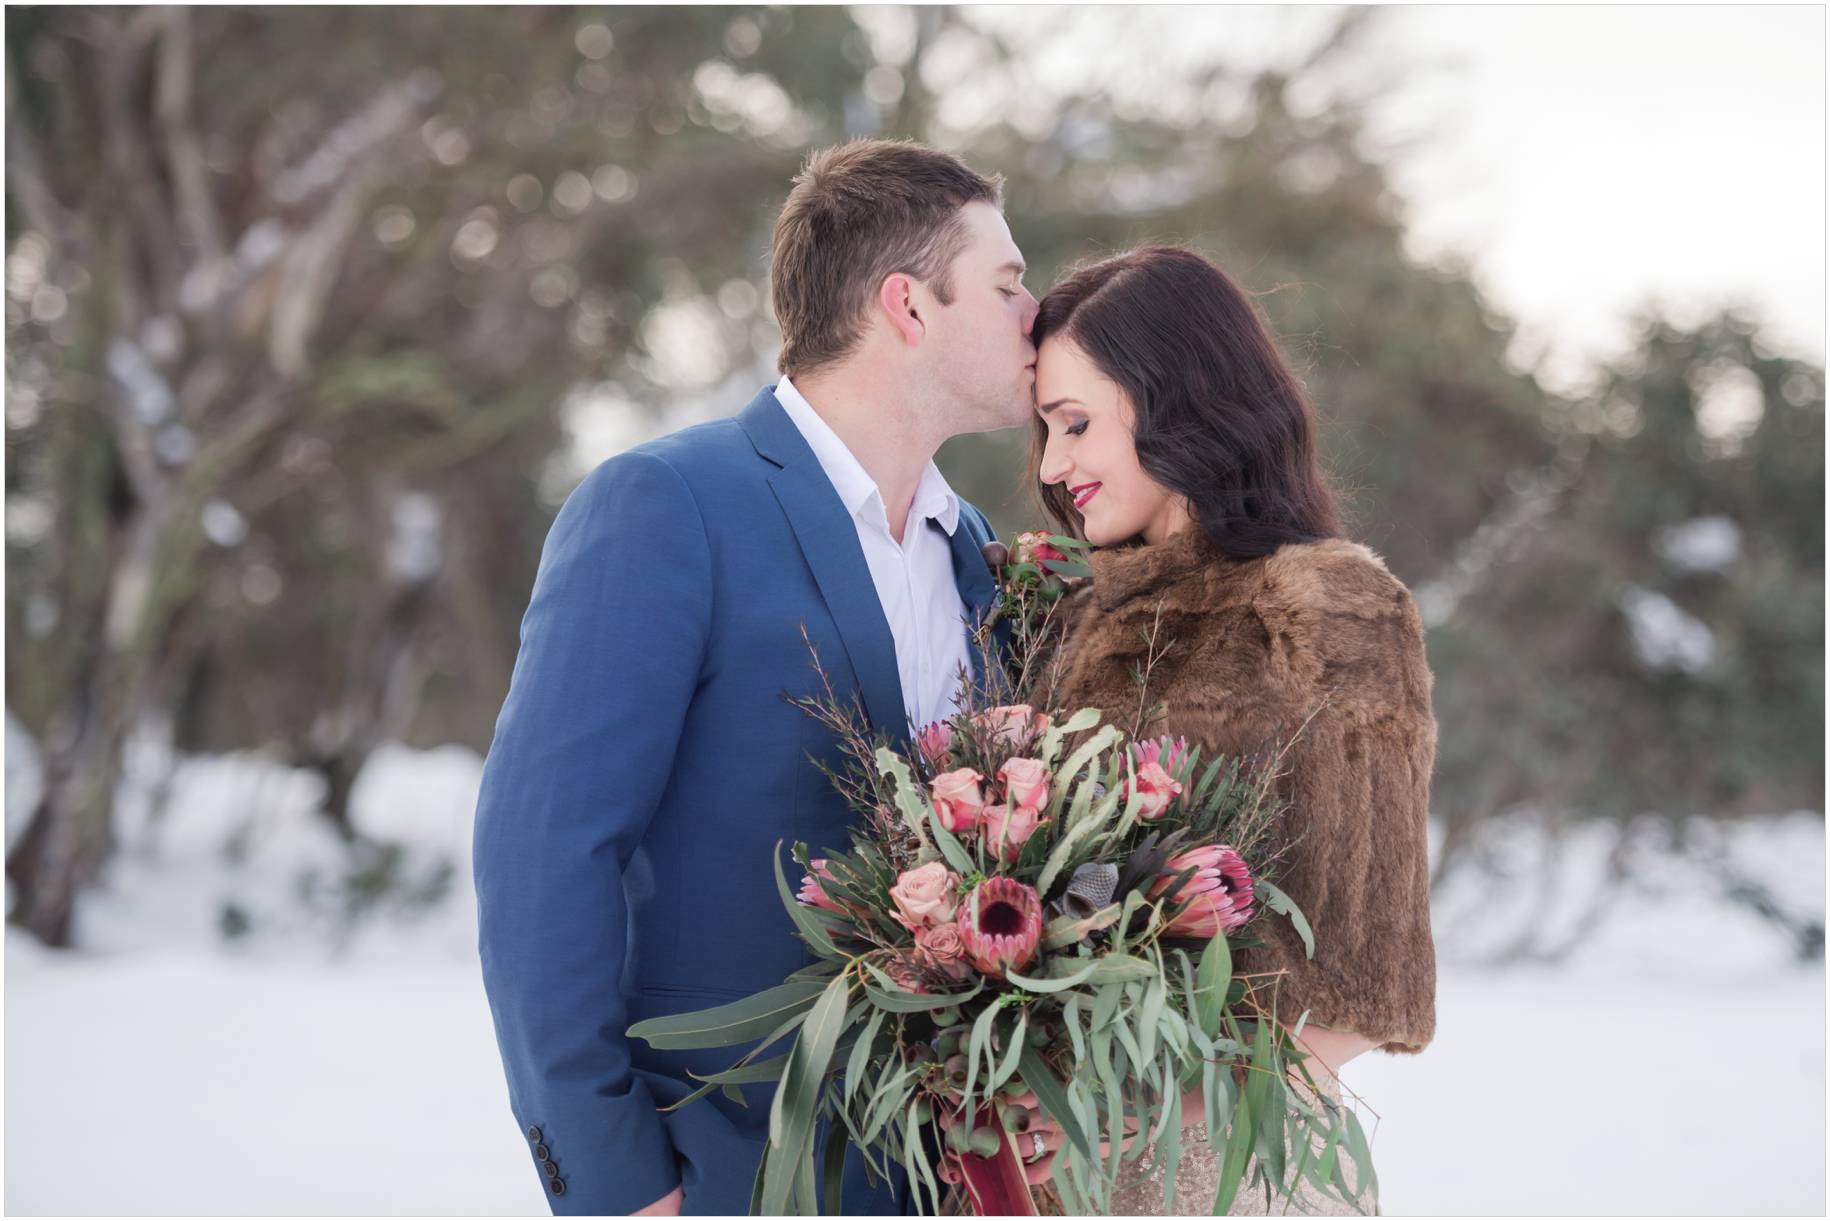 styled engagement photos snow